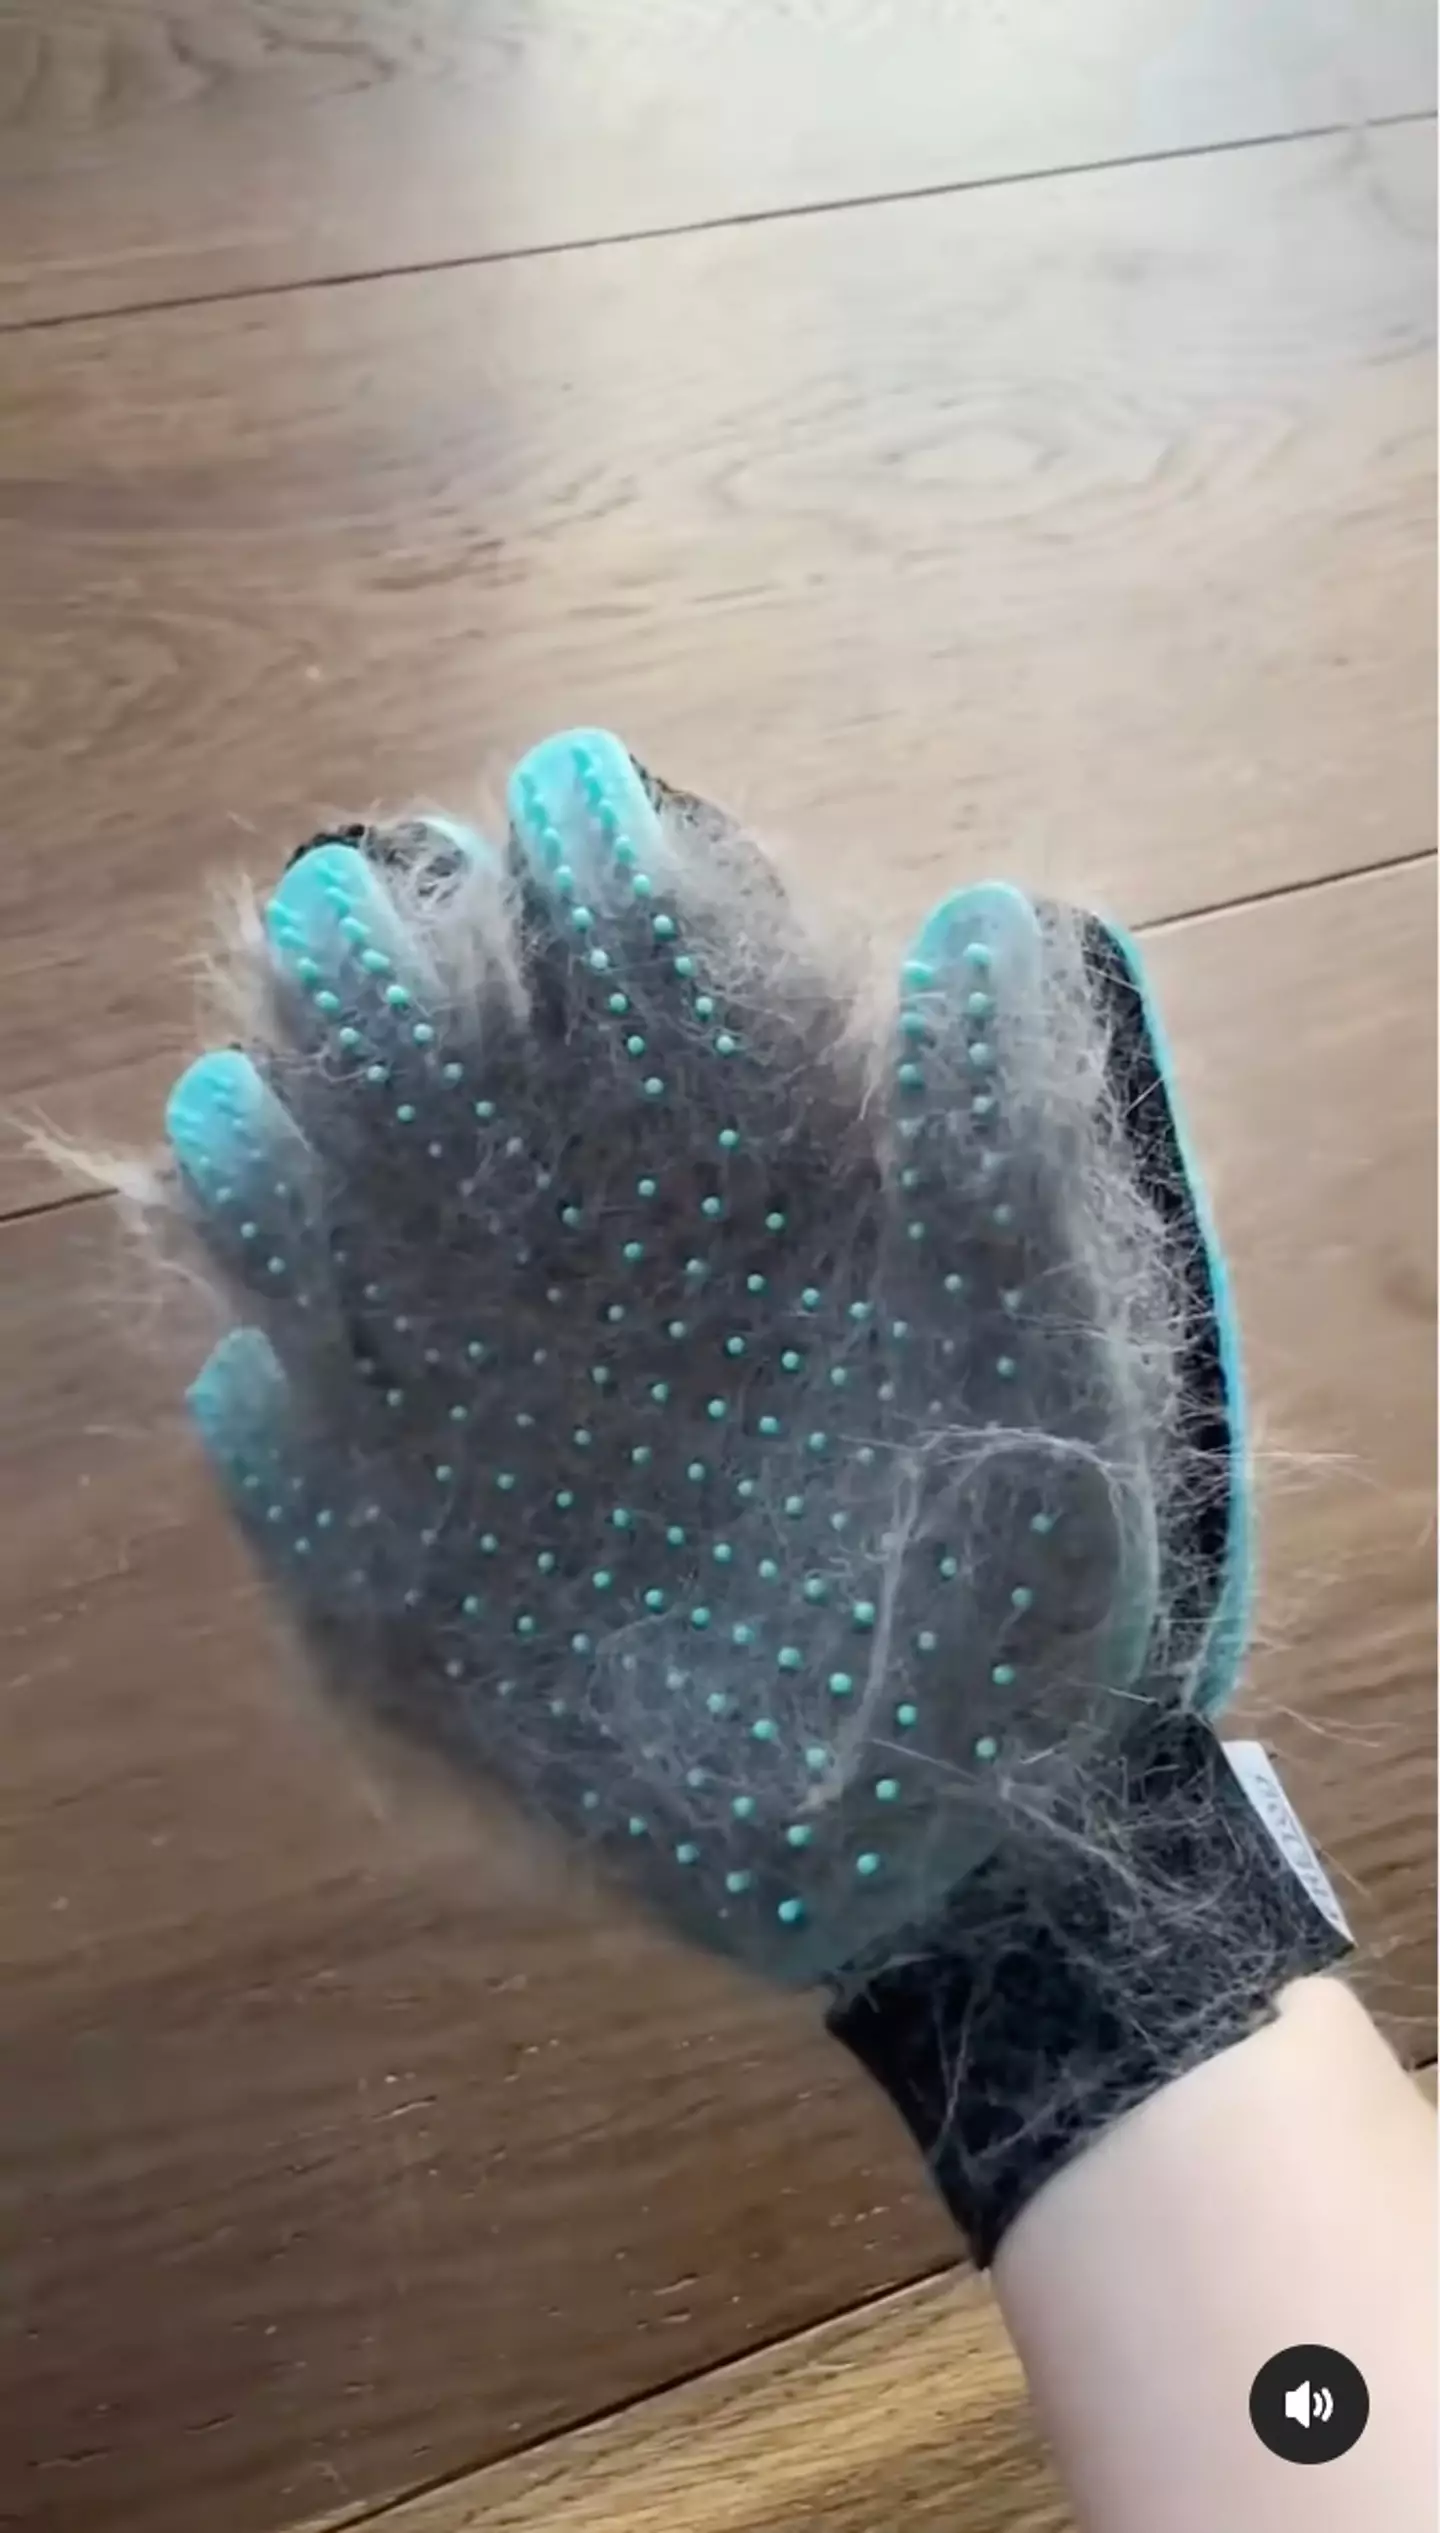 One cat account on Insta took to their reels to share their method in creating the tiny bespoke fashion items, using a pet grooming glove to gently remove their cat’s excess fur (Instagram @ mochithecatto).